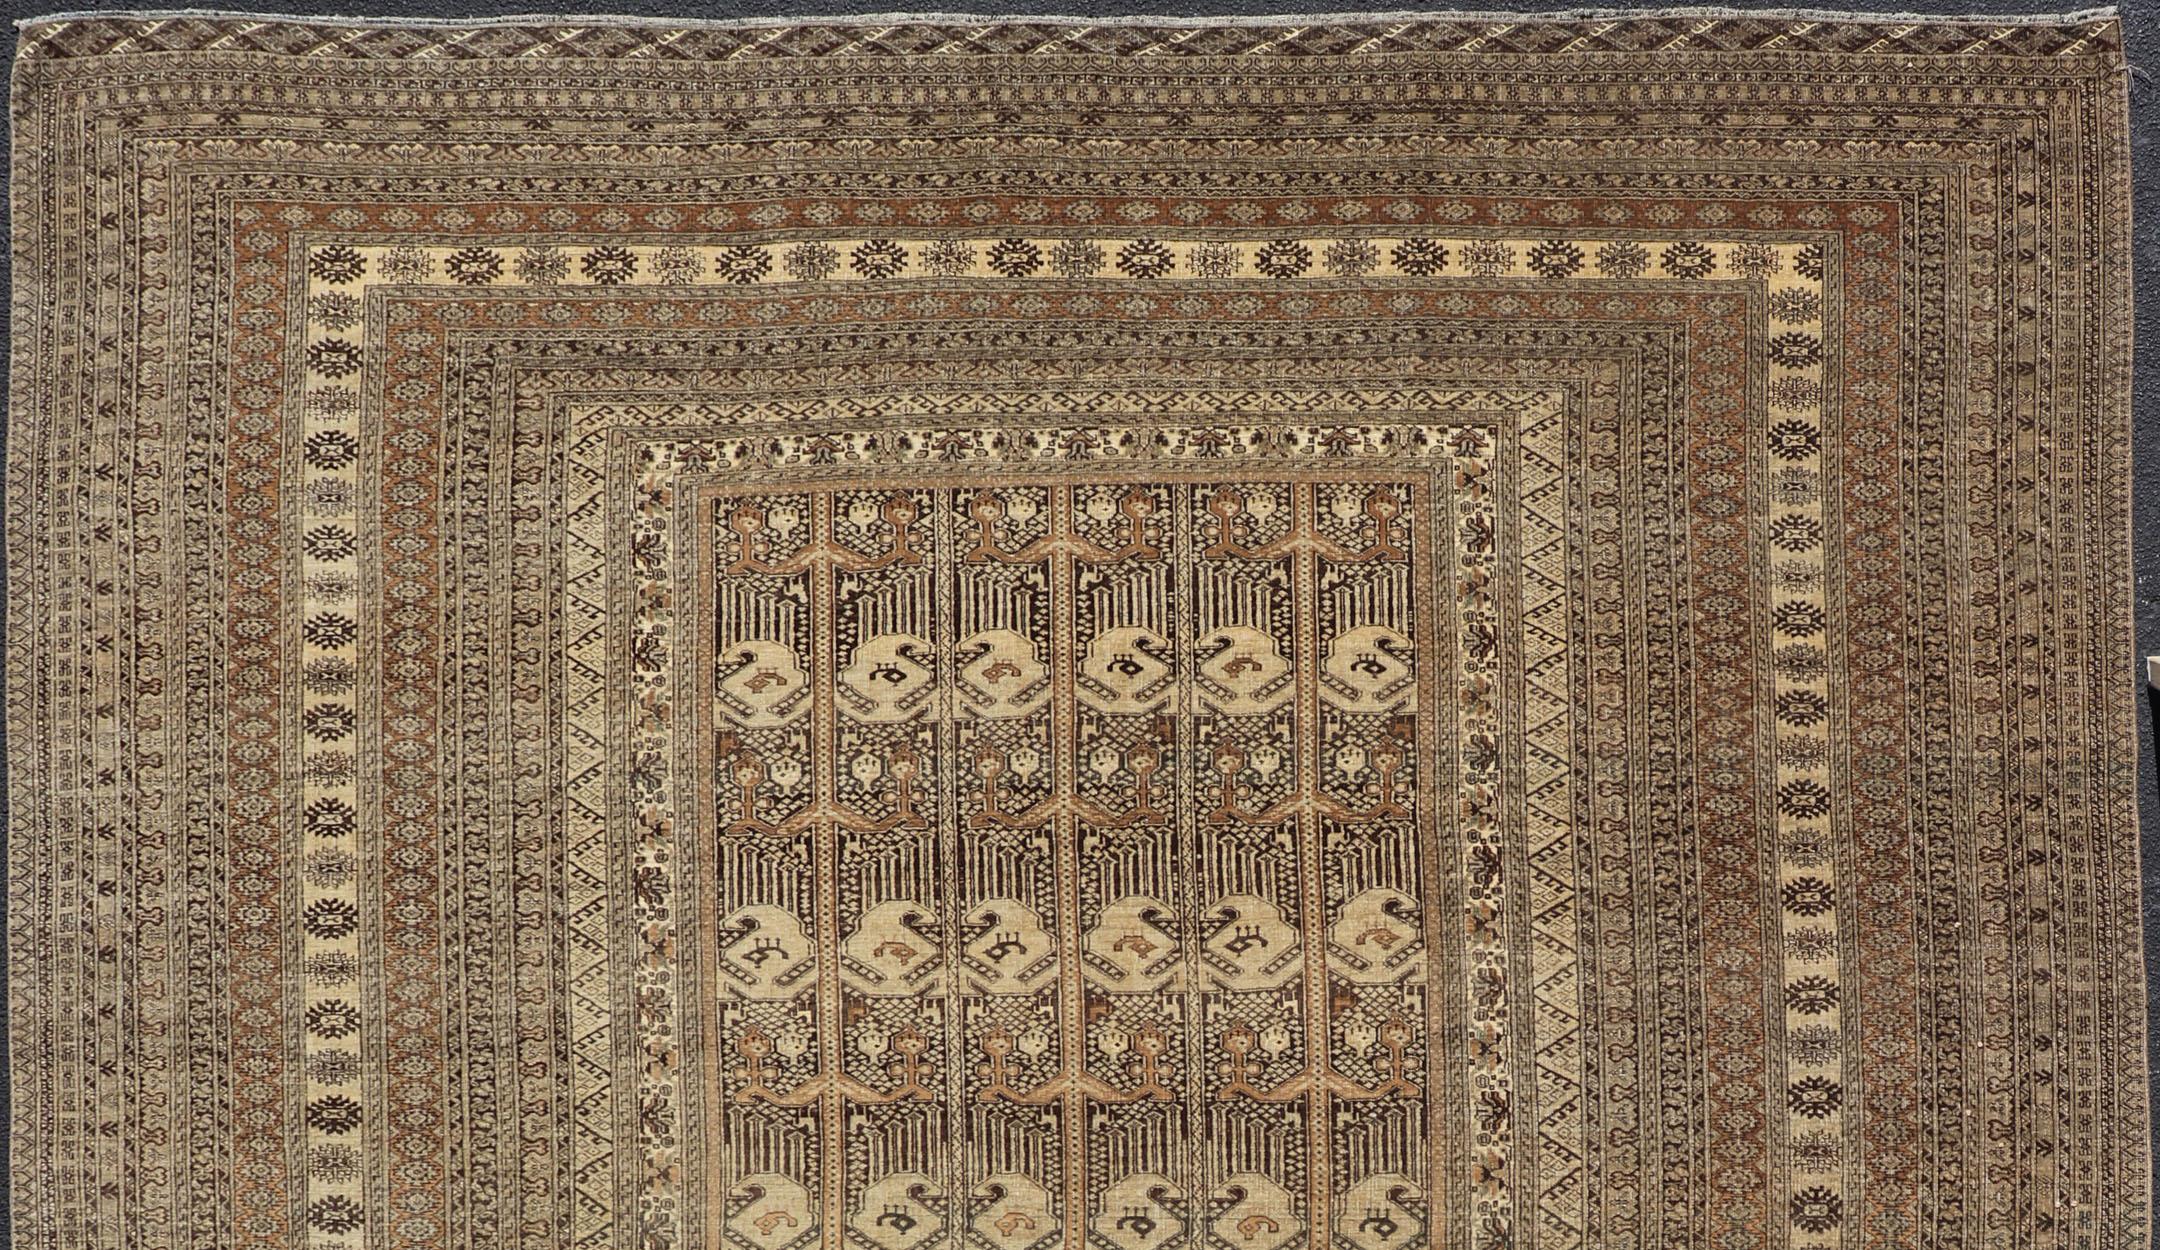 Islamic Hand-Knotted Turkomen Ersari Rug in Wool with All-Over Tribal Beluch Design For Sale